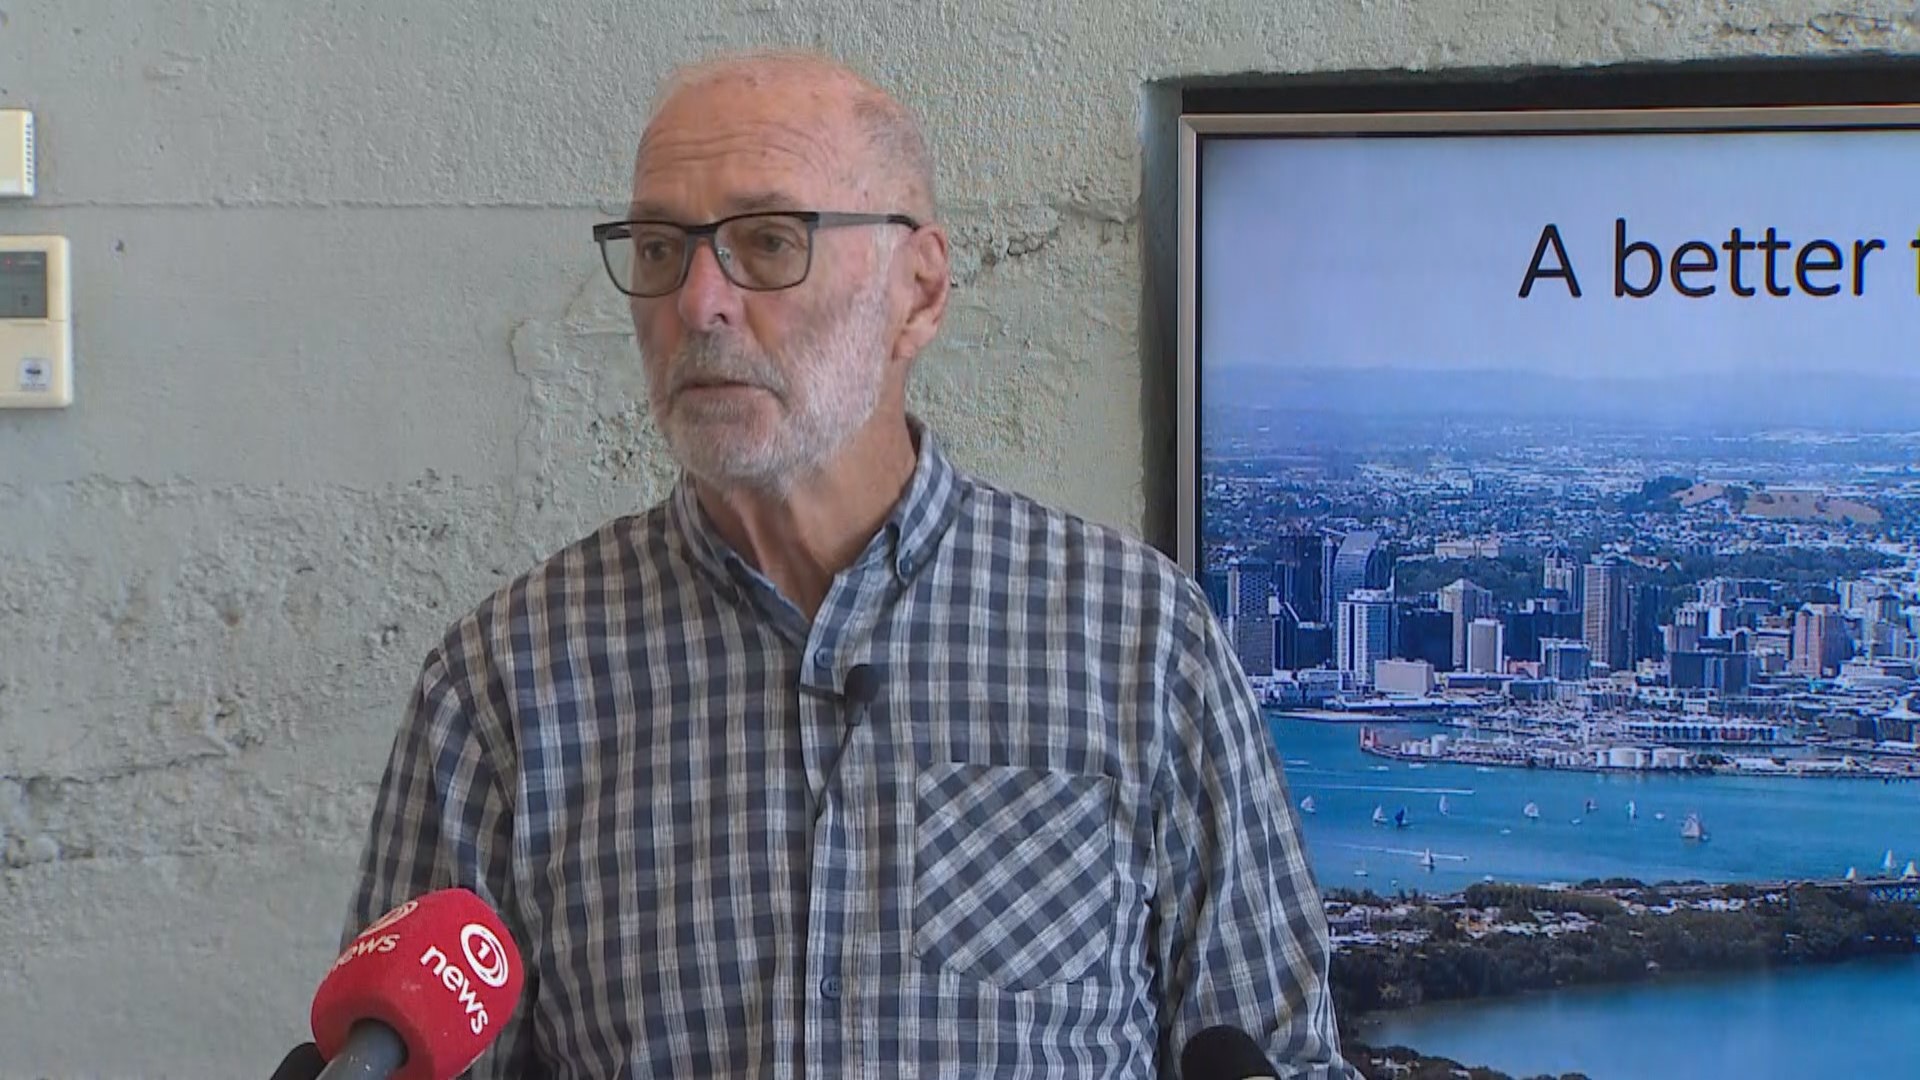 Auckland mayoralty: Wayne Brown's long list of fixes